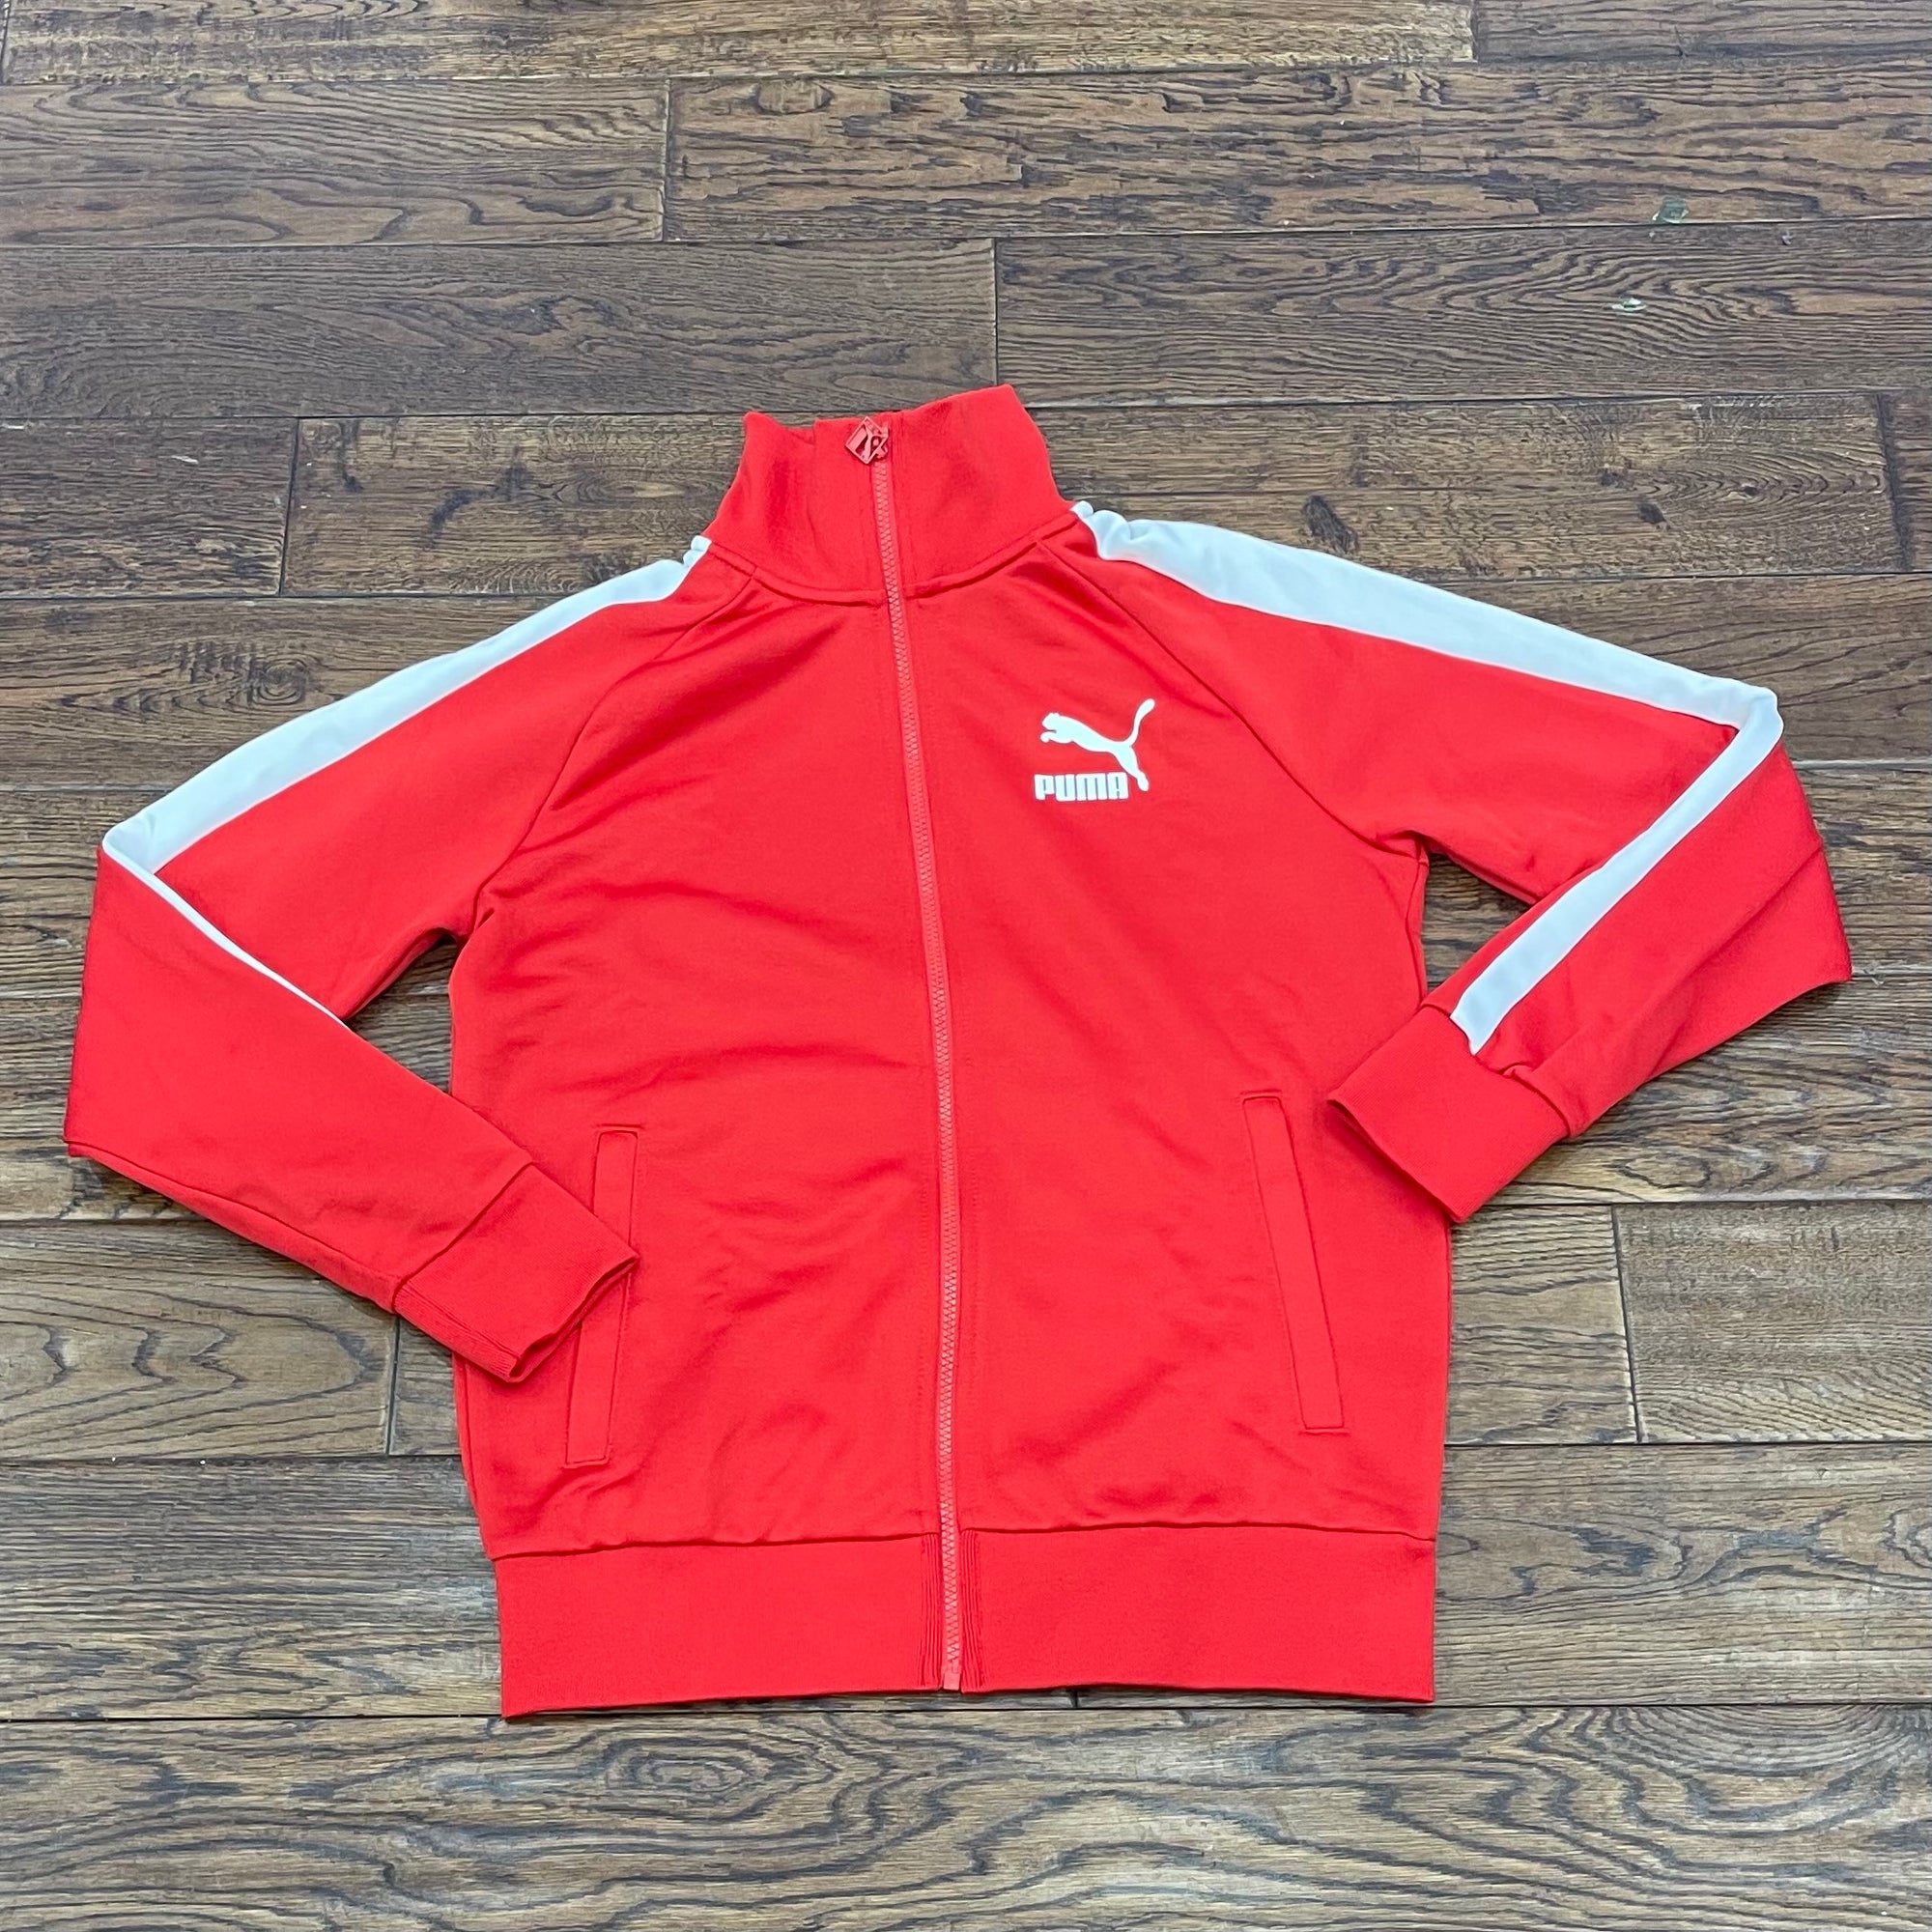 Puma Track Jacket - Red/White - Civilized - Official Site